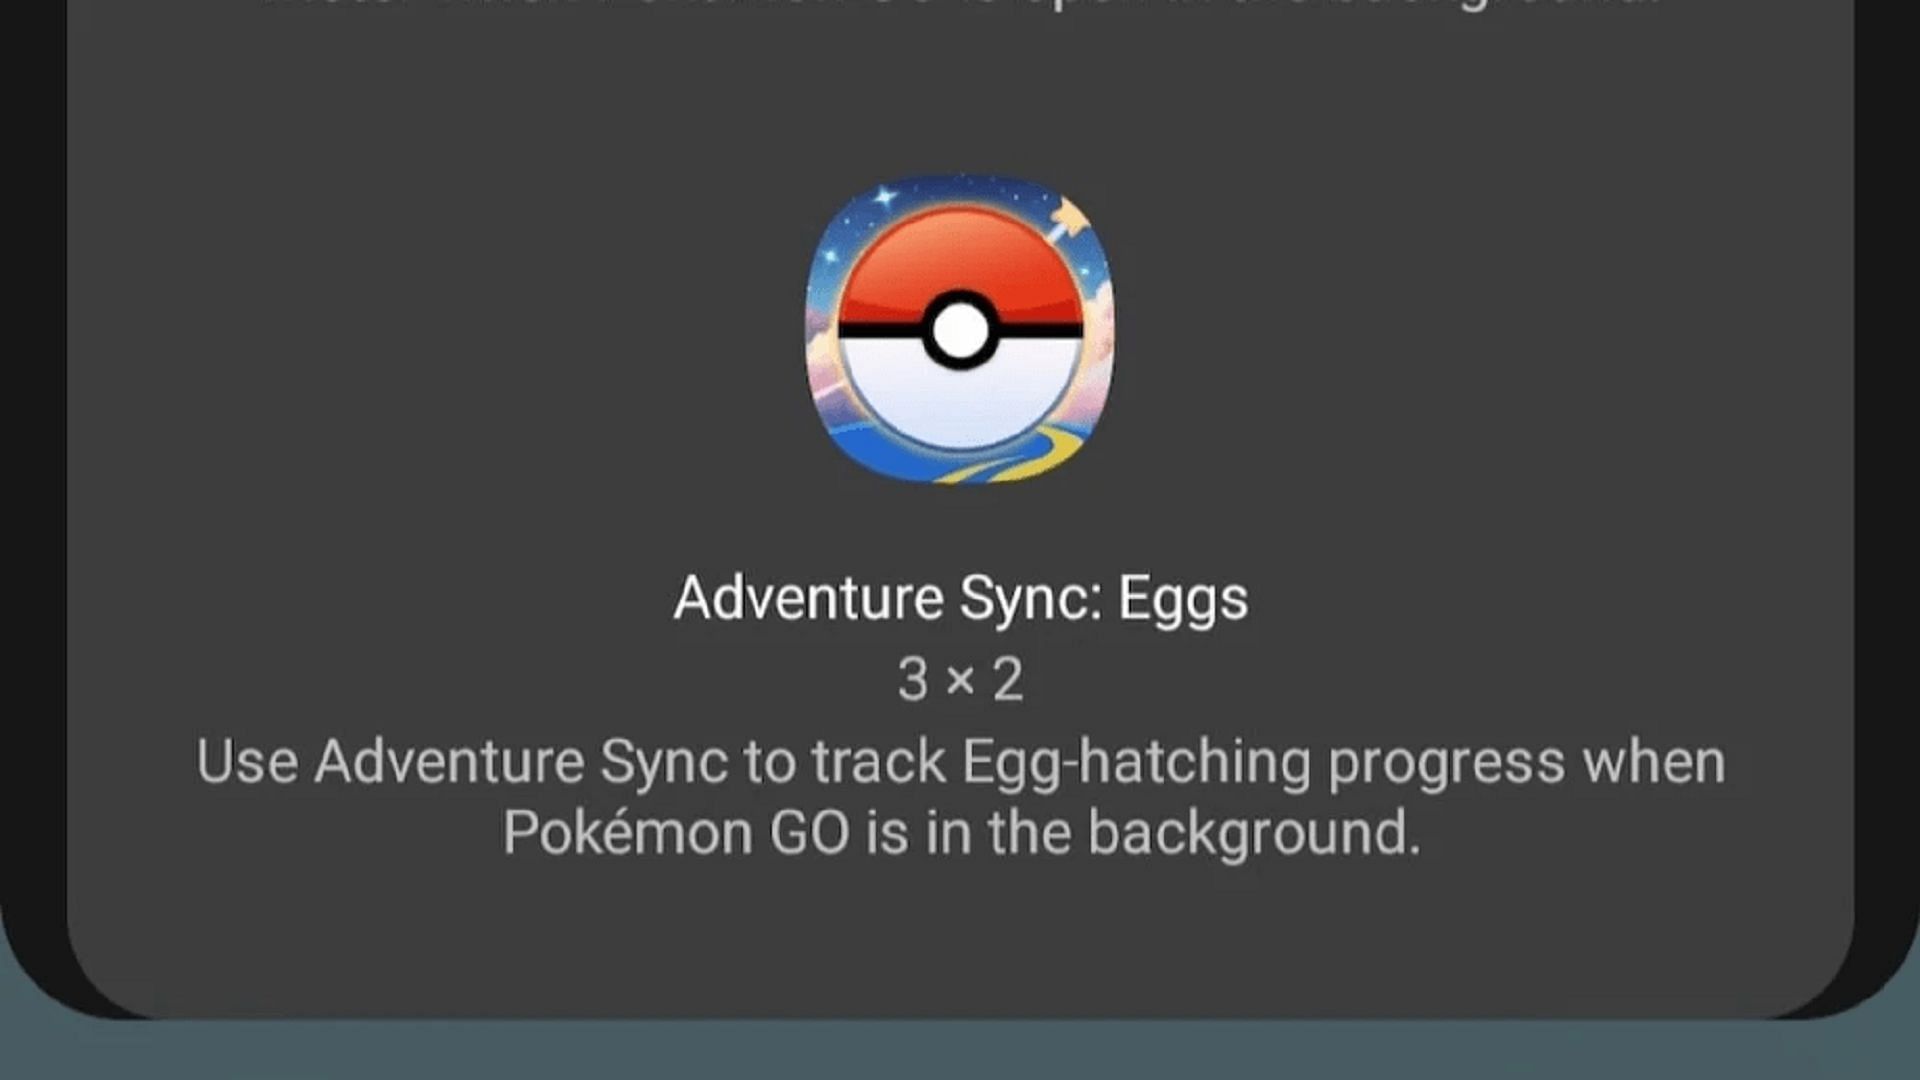 Many phones can utilize a handy Pokemon GO widget to track their egg hatching progress (Image via Niantic)